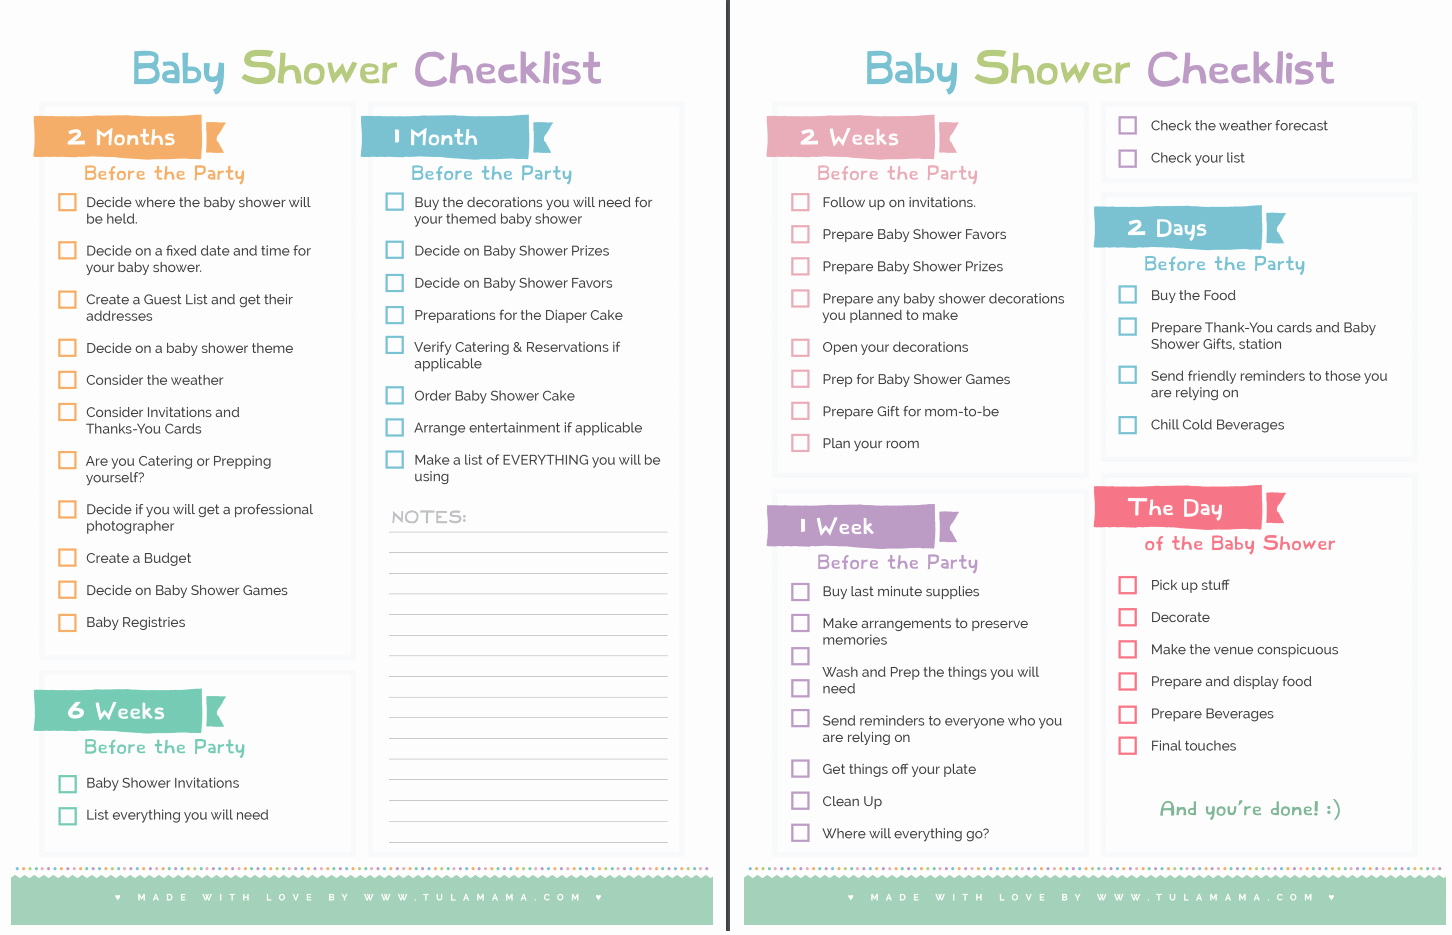 Baby Shower Planning Checklist Inspirational the Ly Baby Shower Checklist You Will Need Tulamama